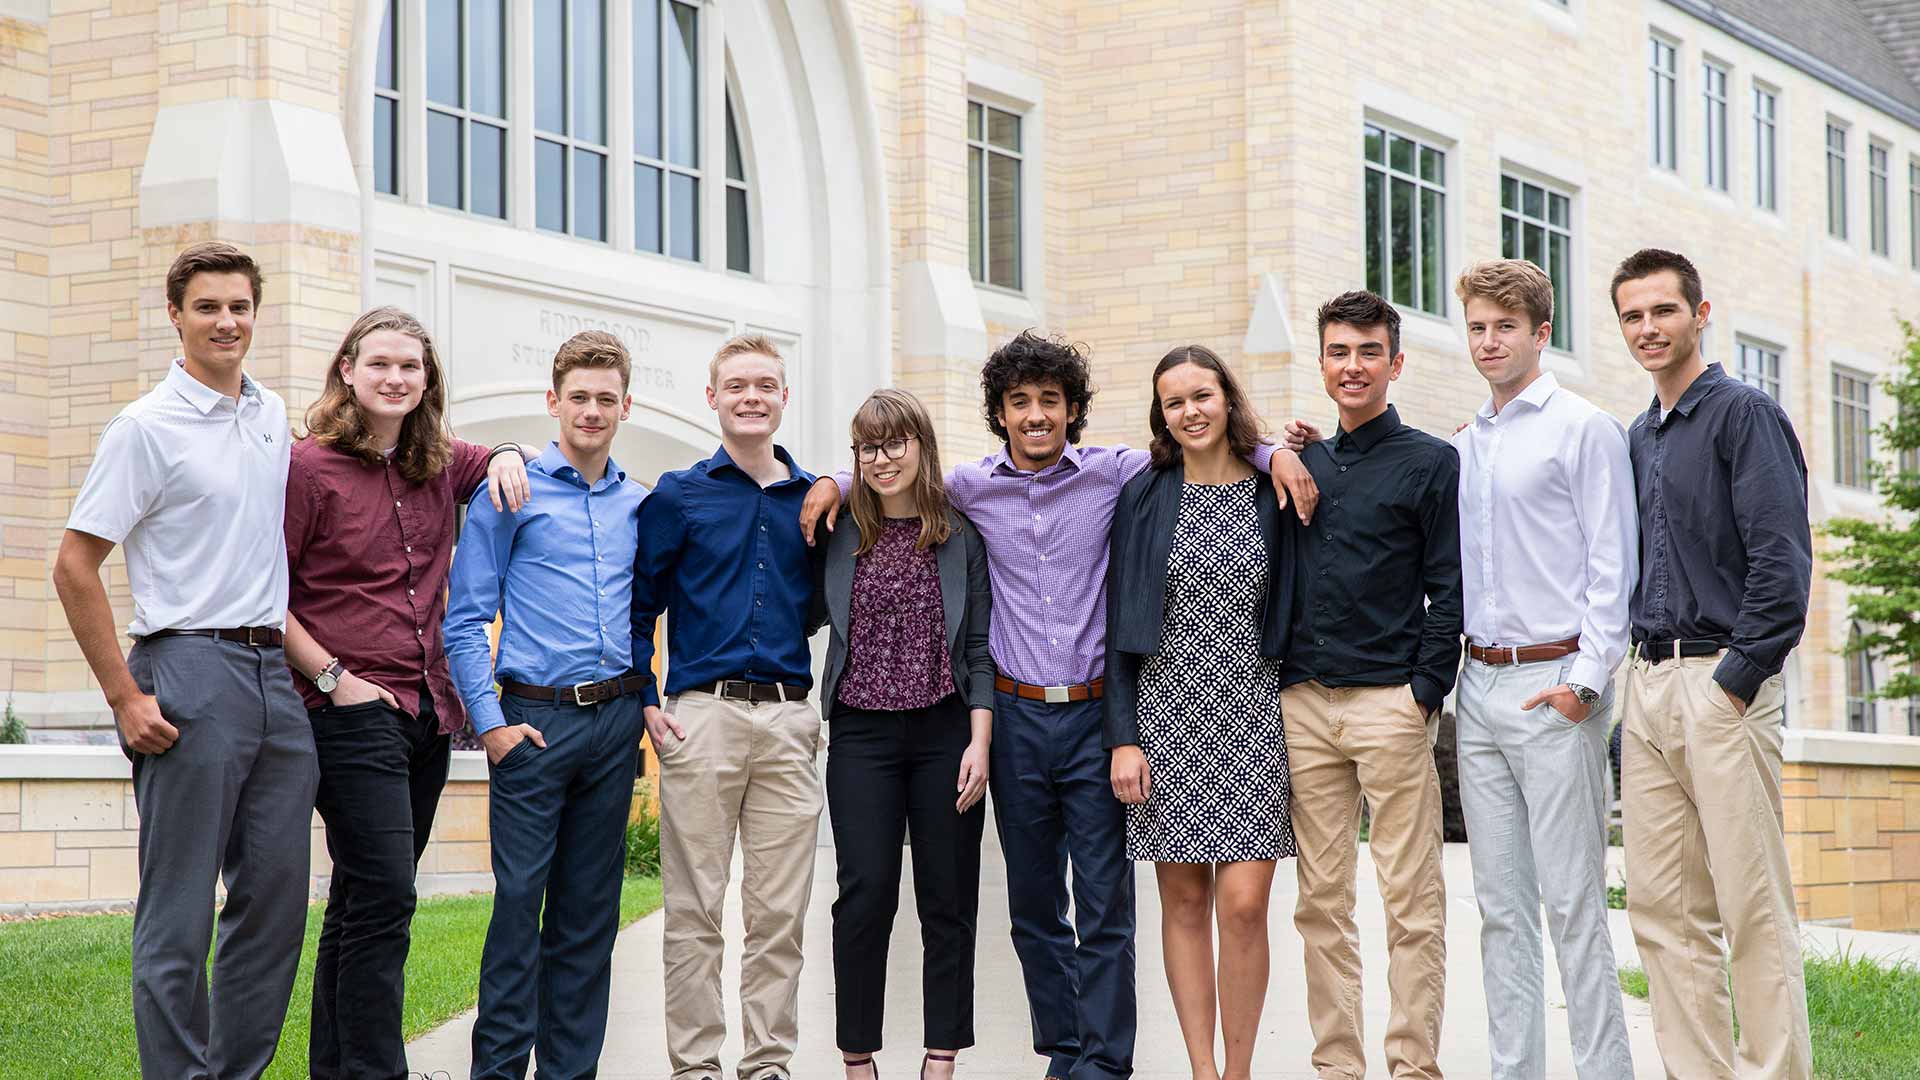 Recipients of the Schulze Innovation Scholarship pose together for a group photo on August 28, 2018 outside of the Anderson Student Center.